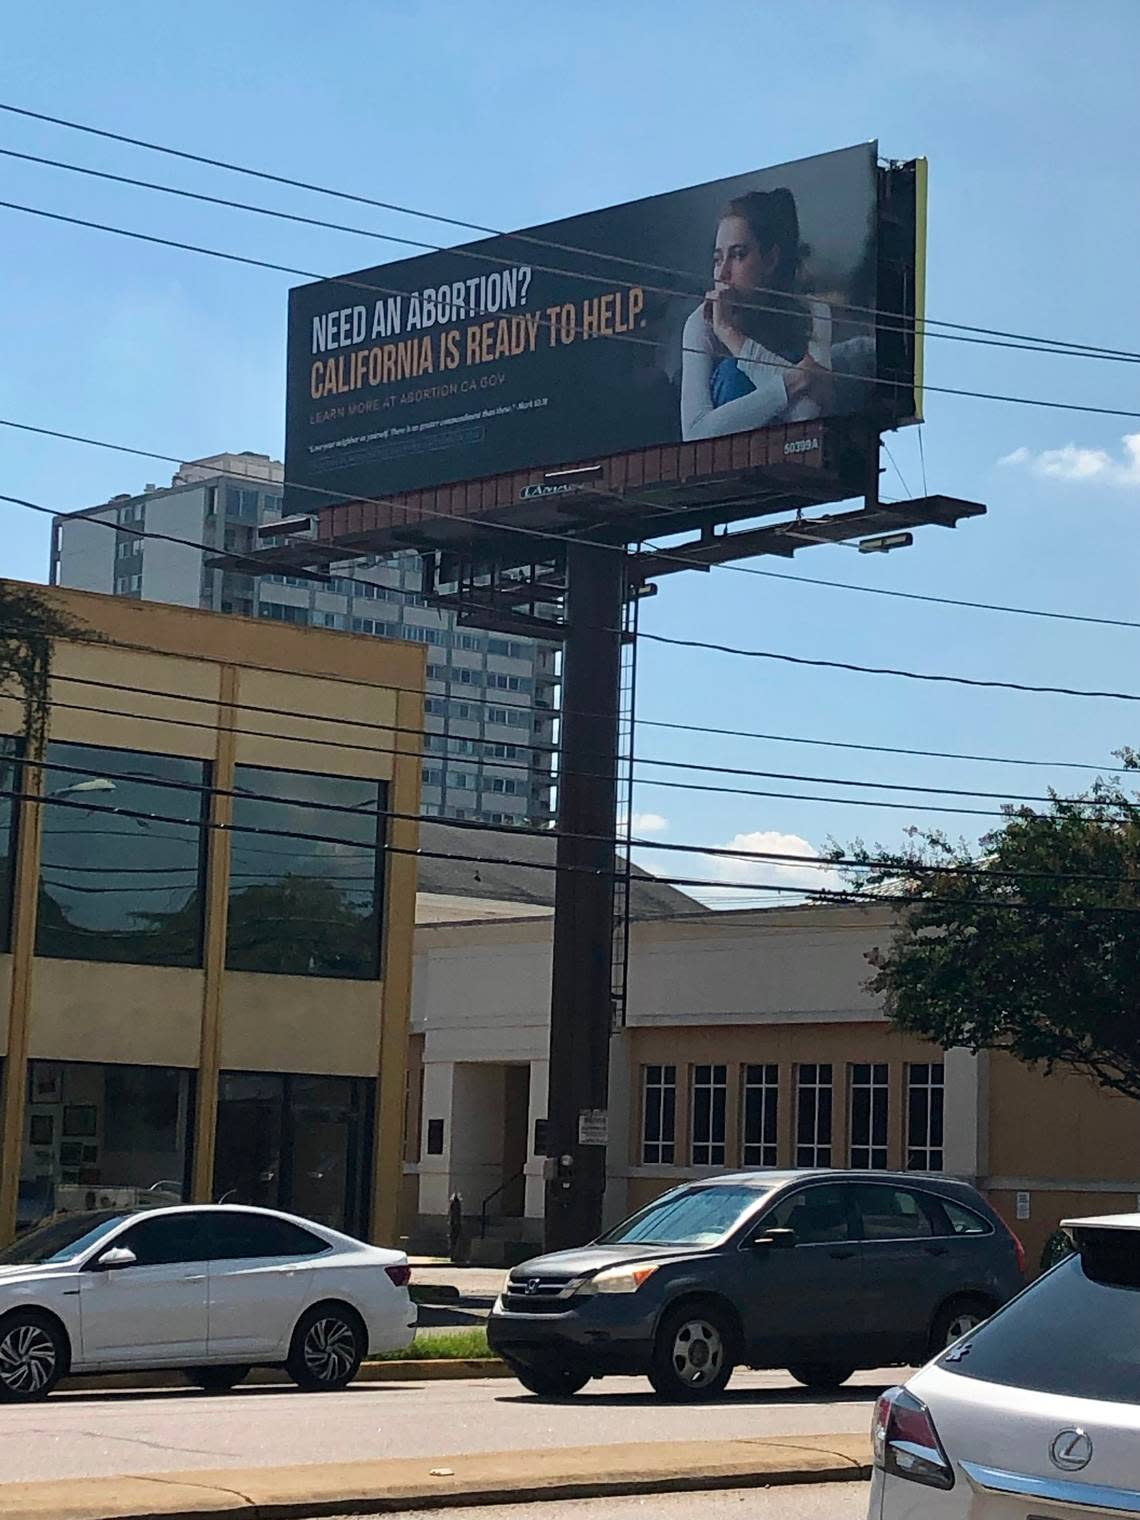 A billboard advertising abortion services in California popped up on Gervais Street in Columbia recently. The ad was paid for by California’s Democratic Gov. Gavin Newsom.